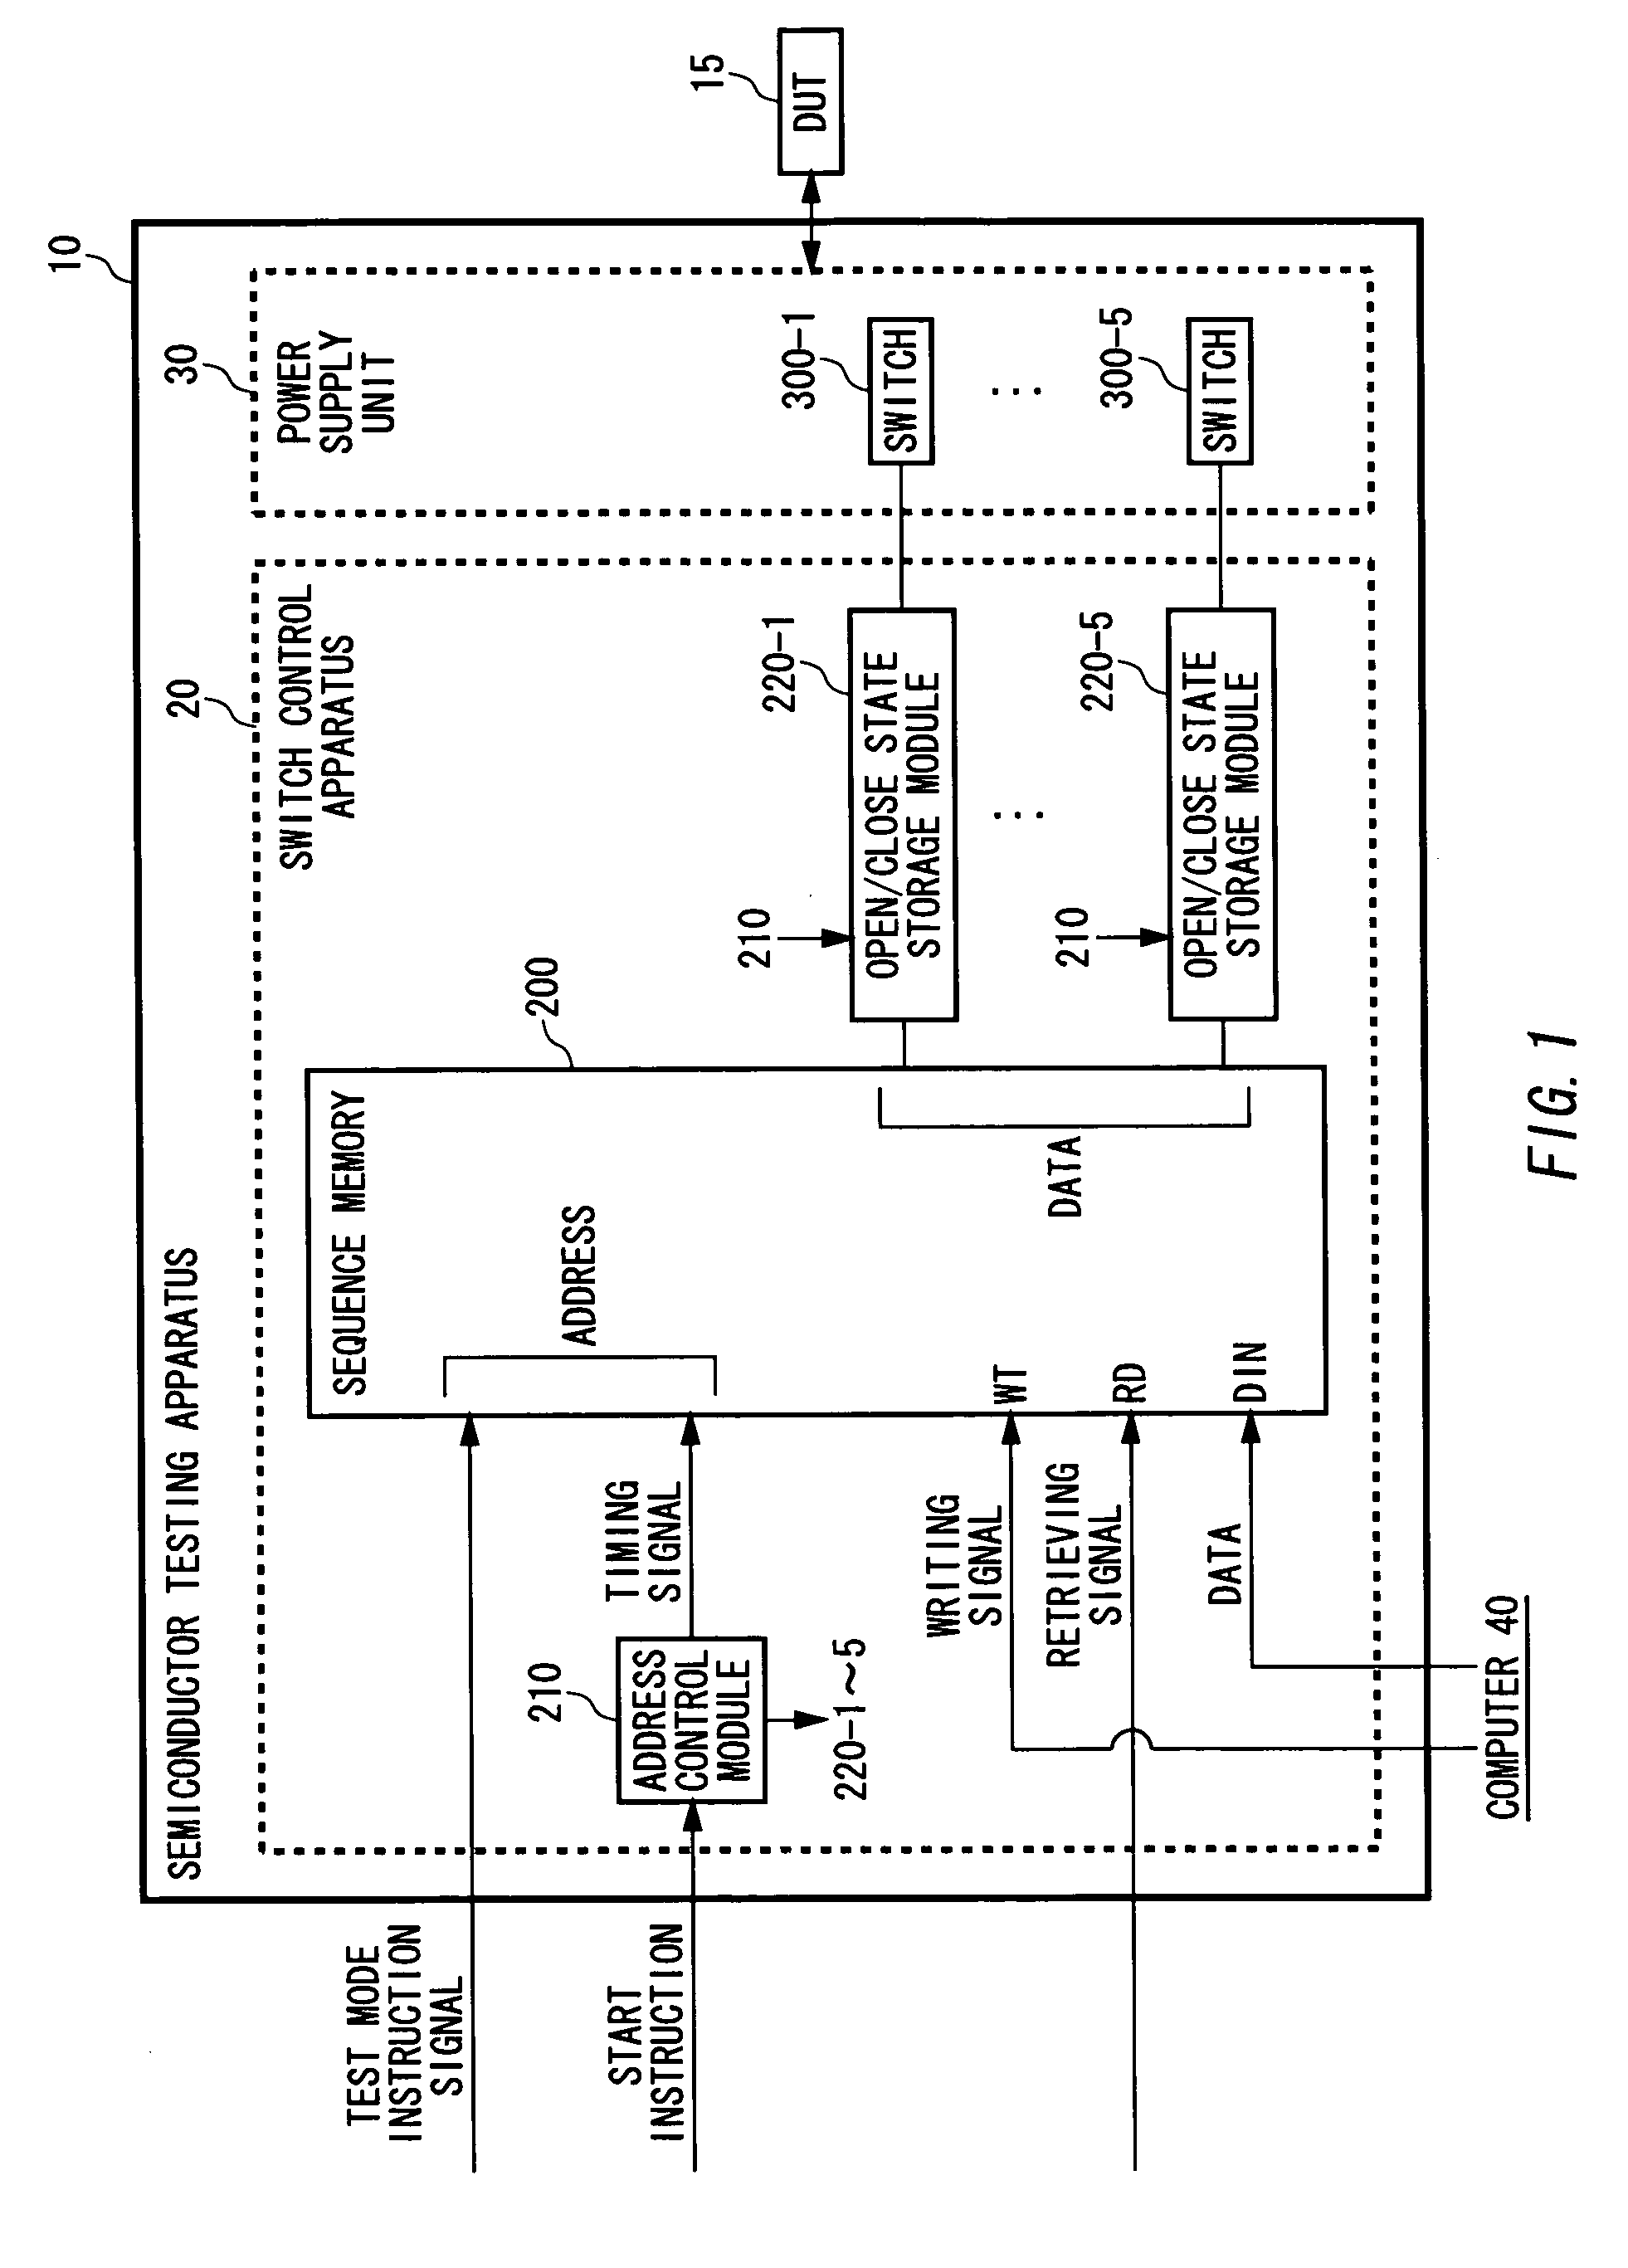 Switch control apparatus, semiconductor device test apparatus and sequence pattern generating program